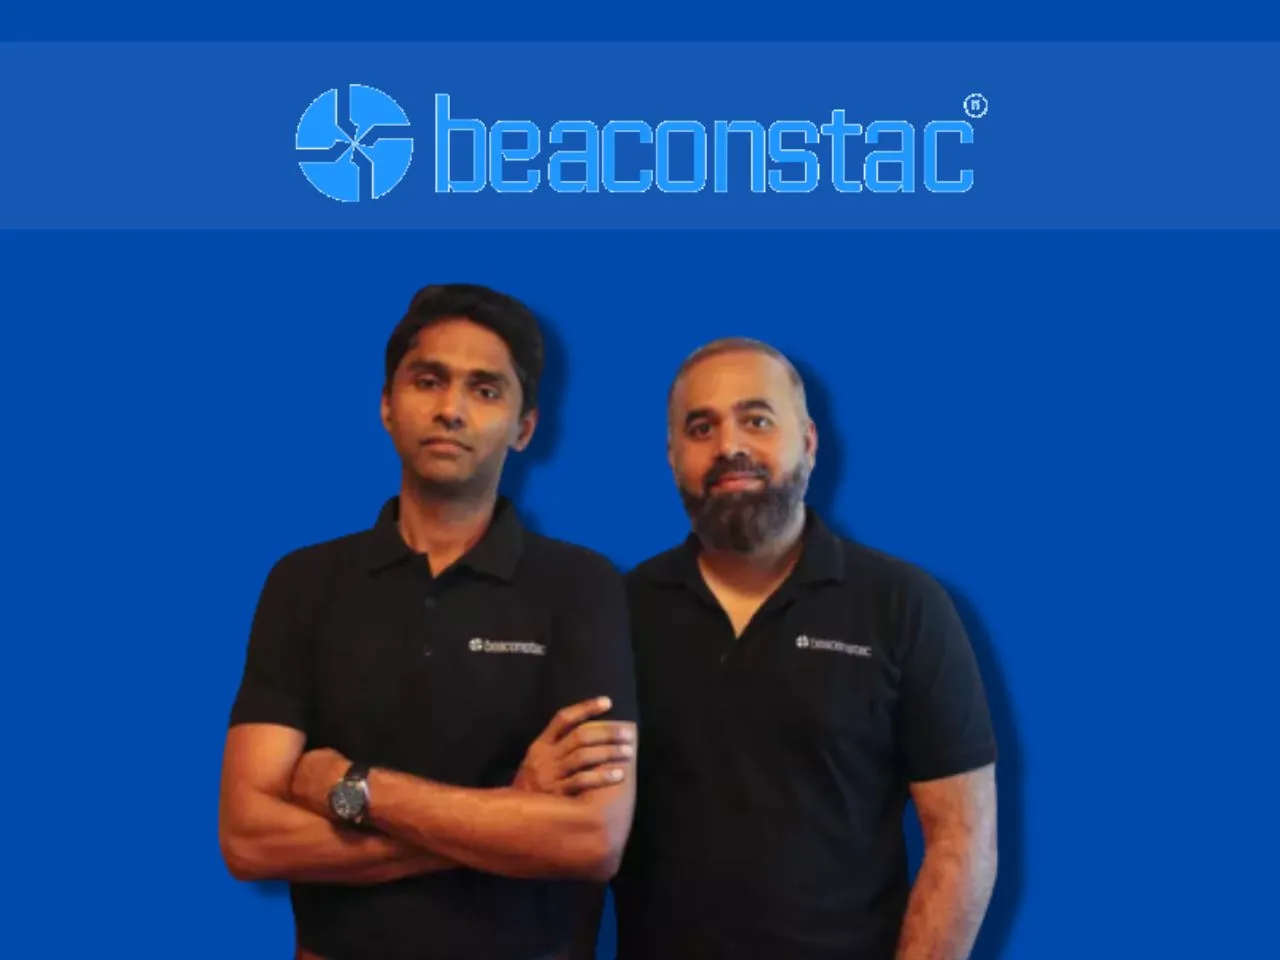 Beaconstac Secures $25 Million in Series A Funding